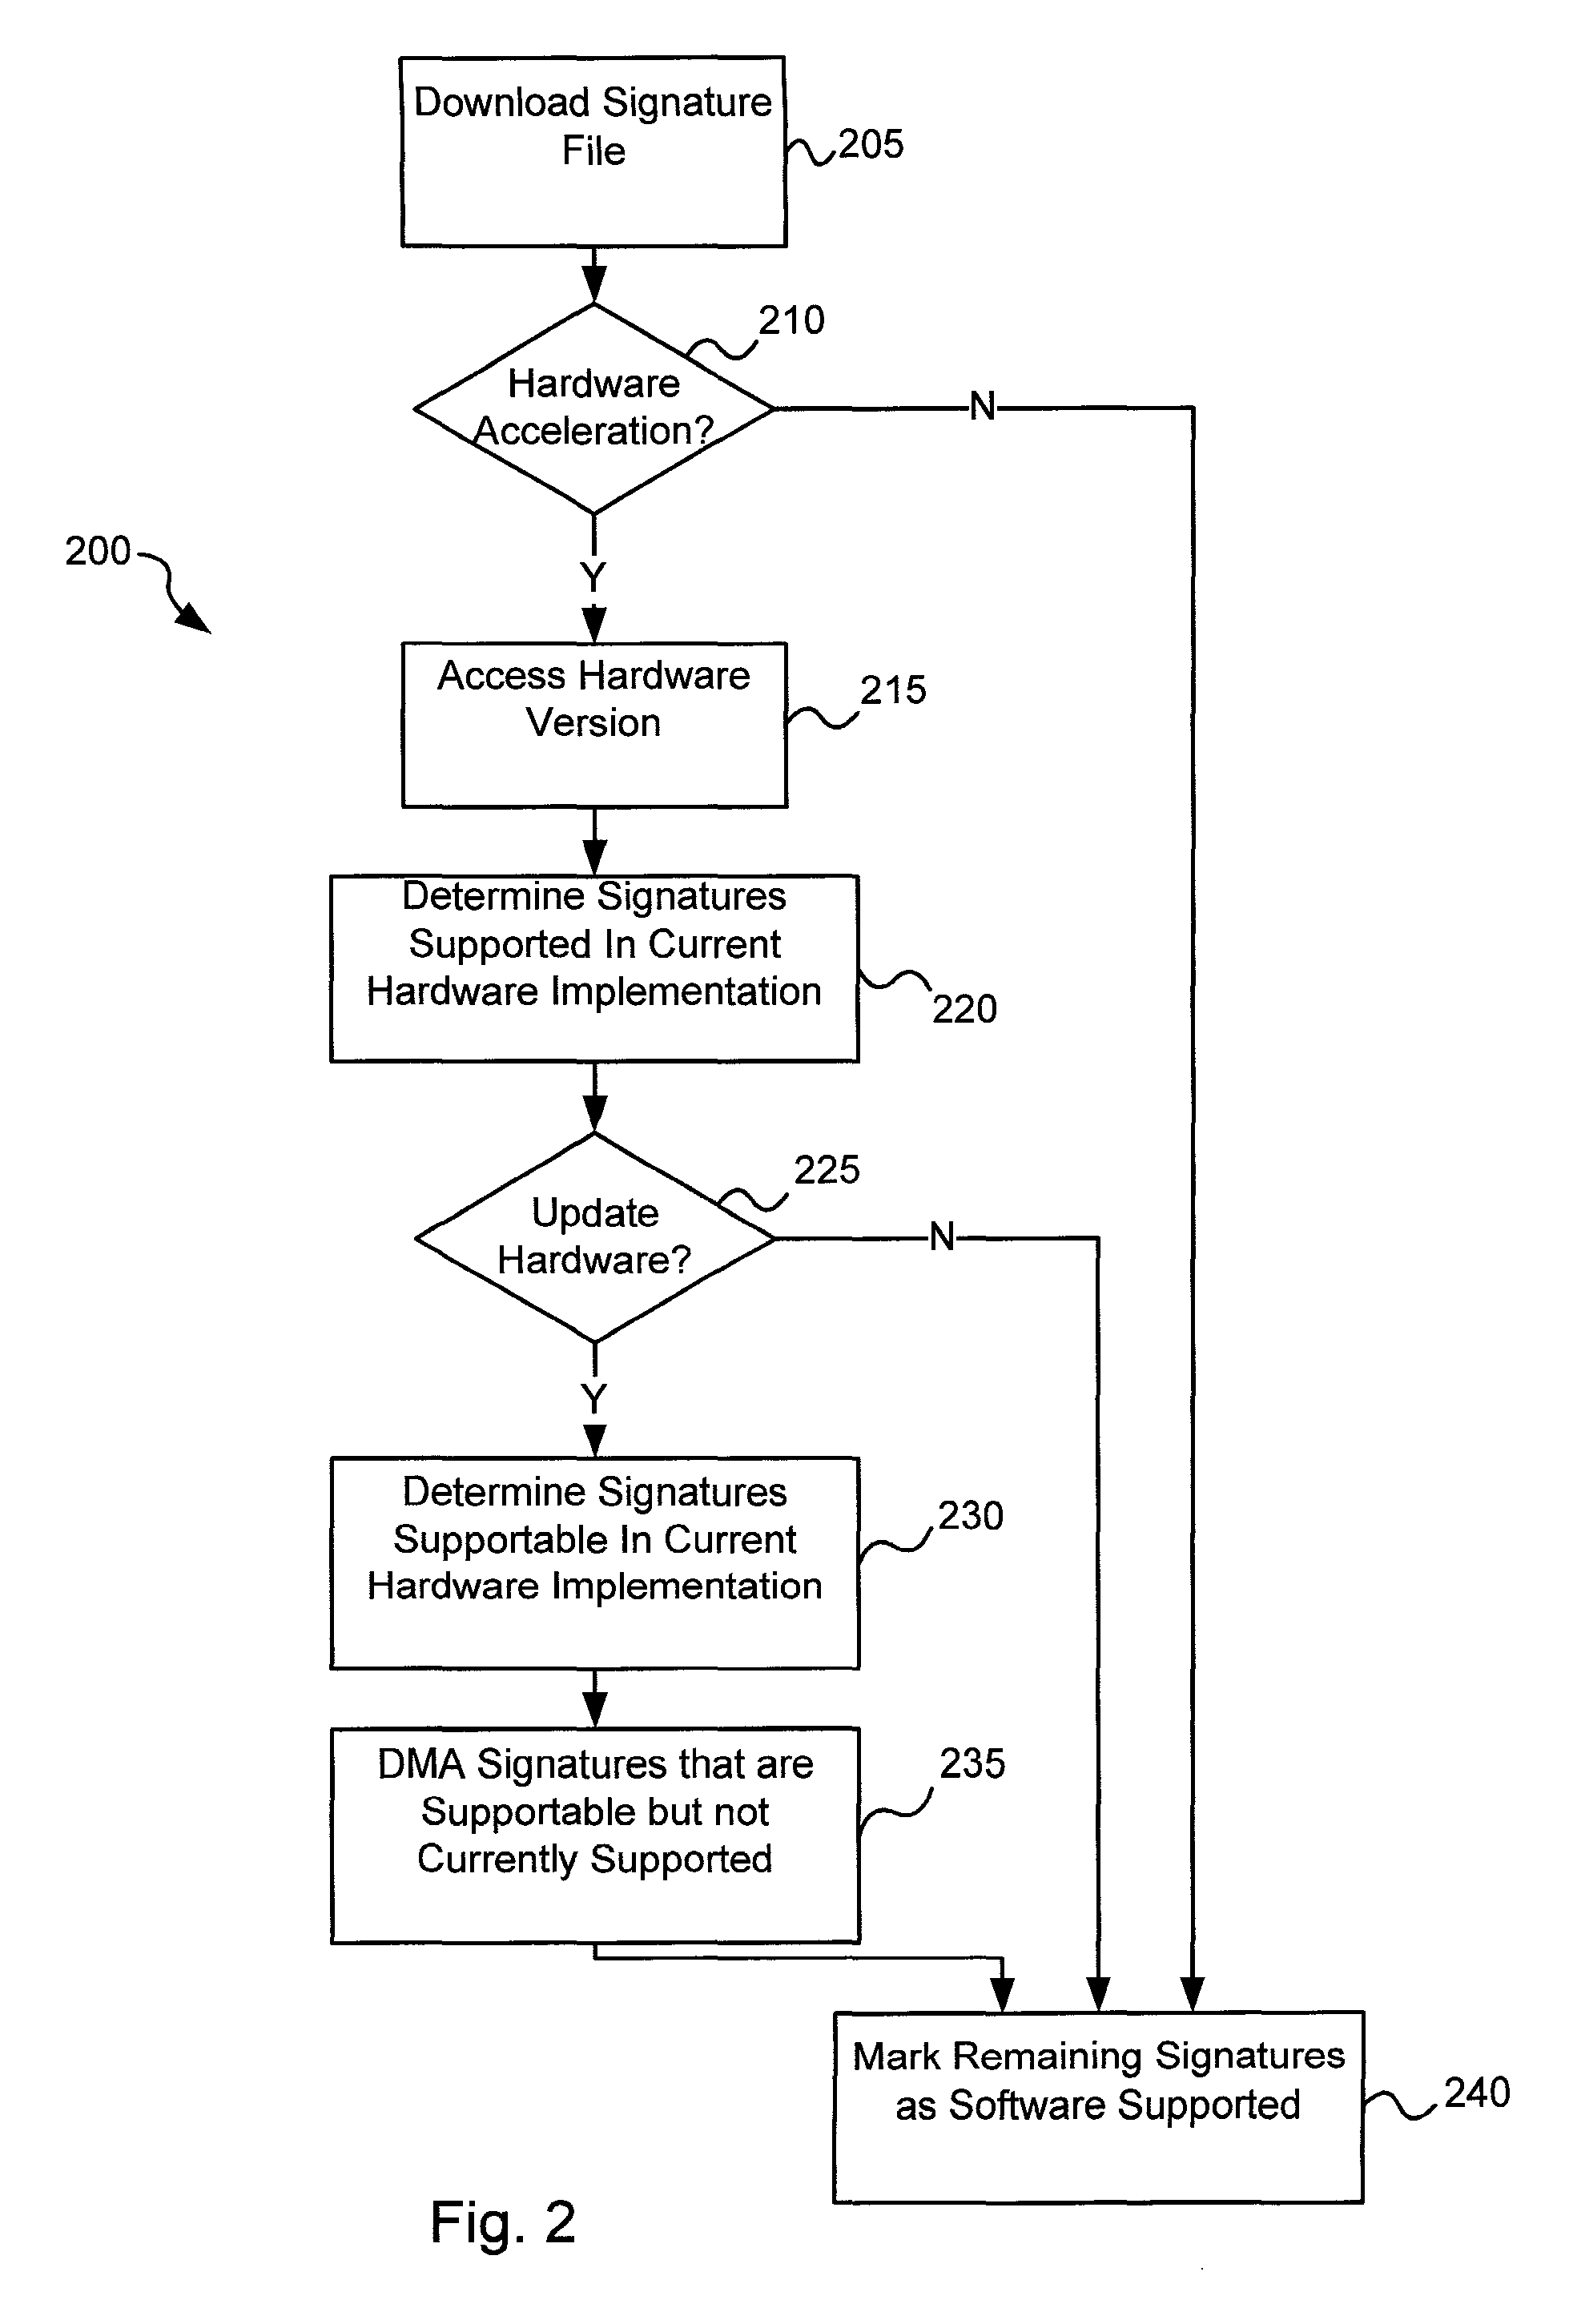 Circuits and methods for efficient data transfer in a virus co-processing system